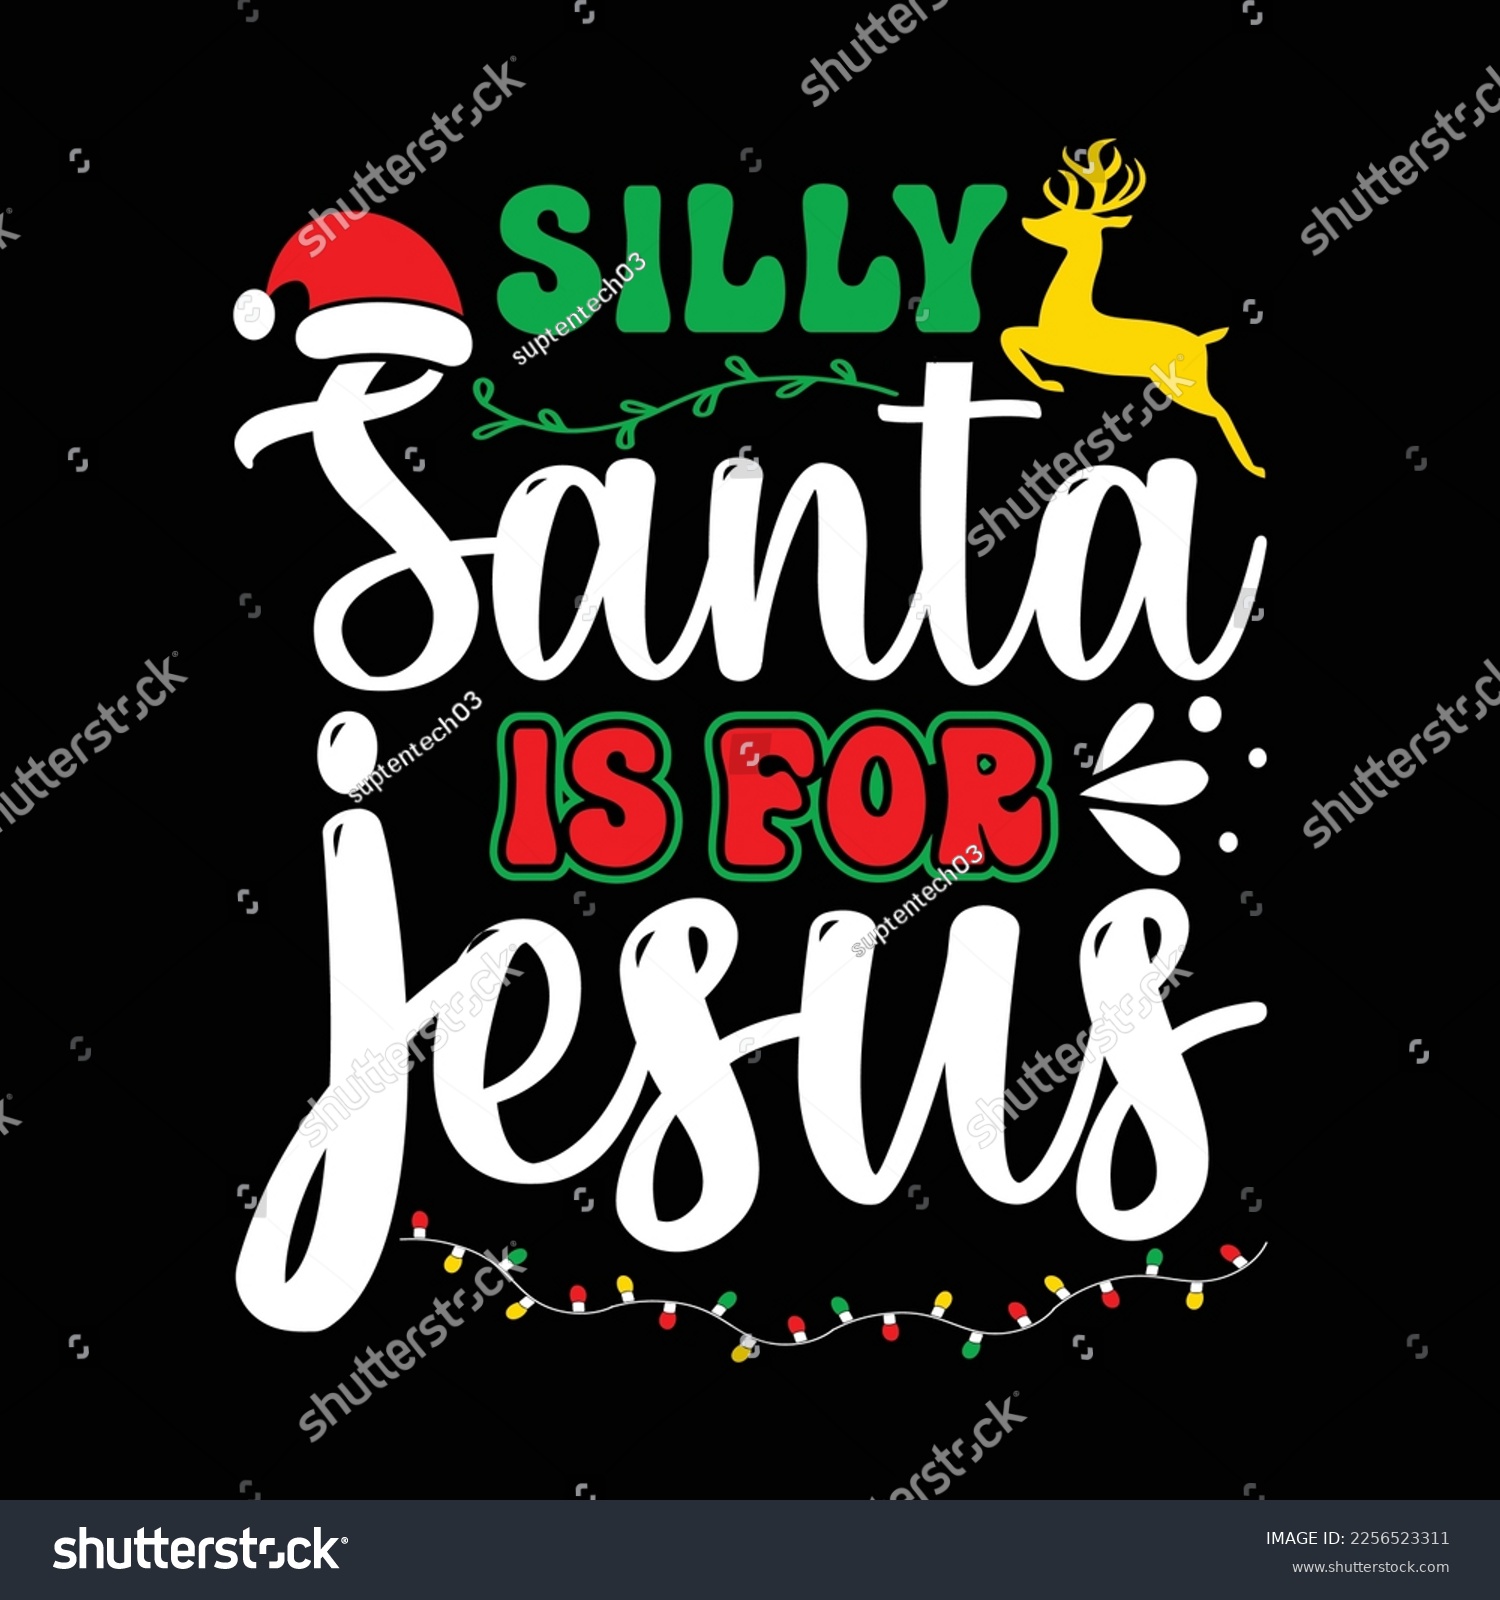 SVG of Silly Santa is for Jesus, Merry Christmas shirts Print Template, Xmas Ugly Snow Santa Clouse New Year Holiday Candy Santa Hat vector illustration for Christmas hand lettered svg